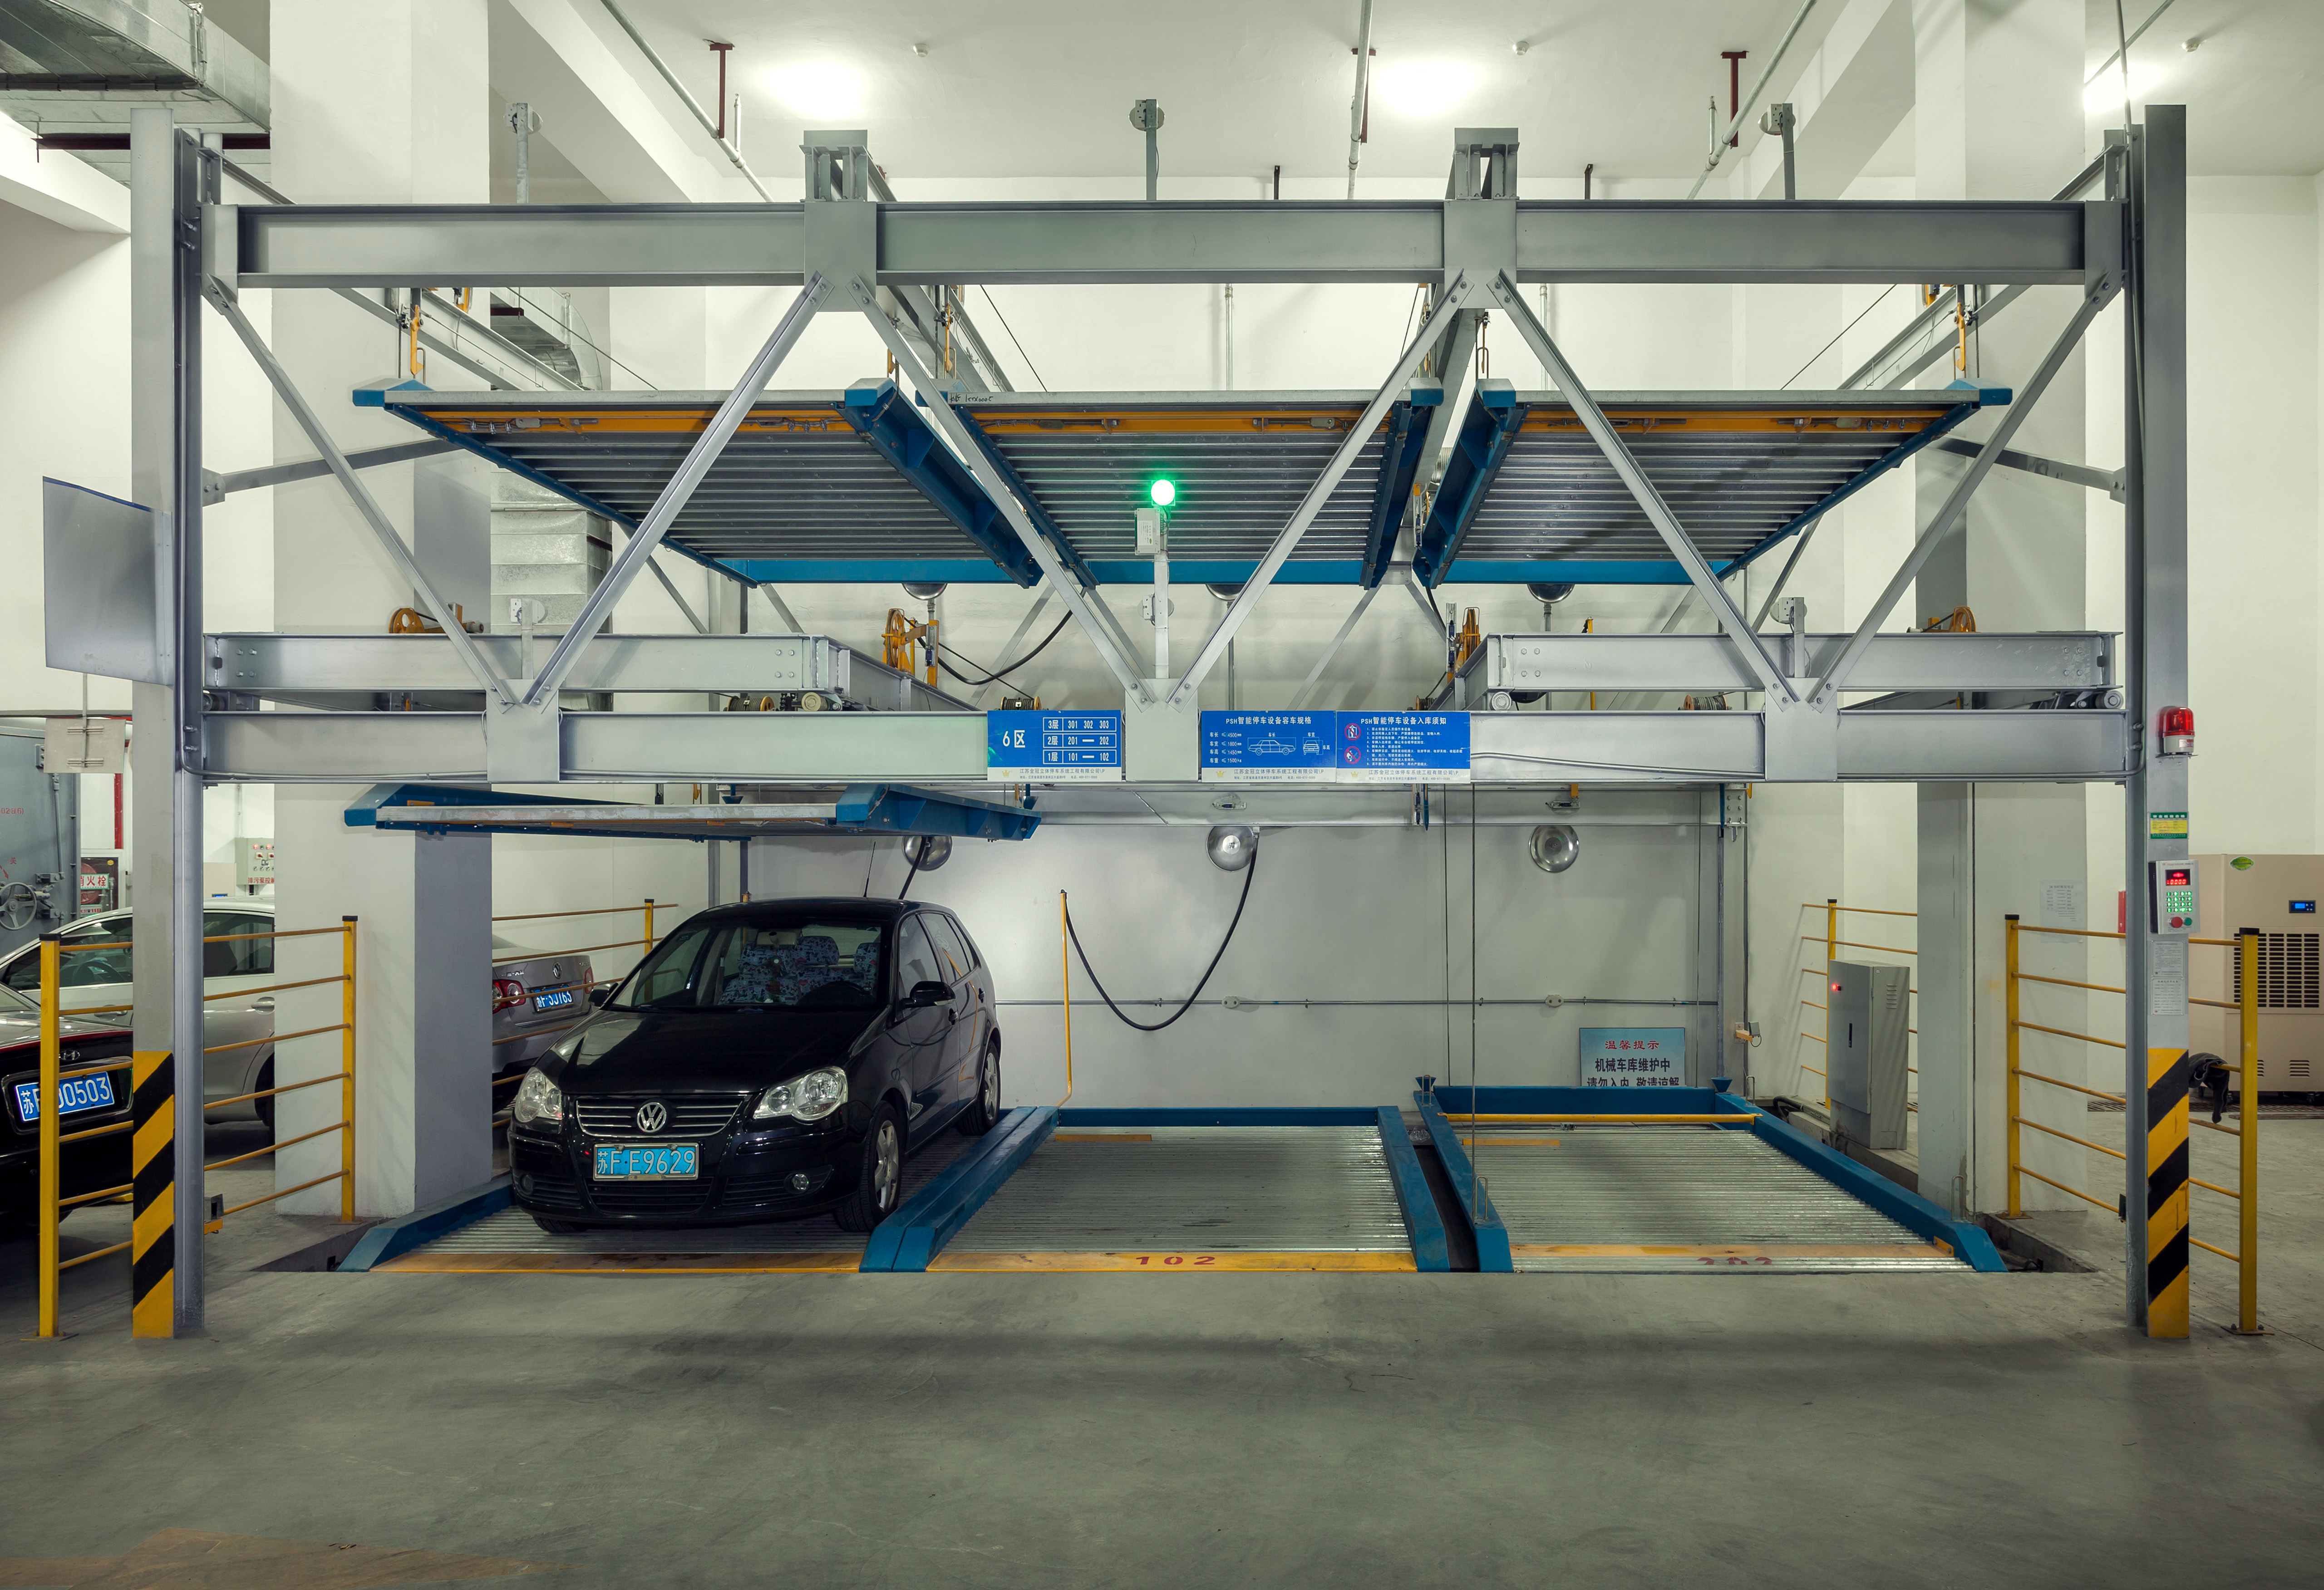 How Does a Parking System Work?